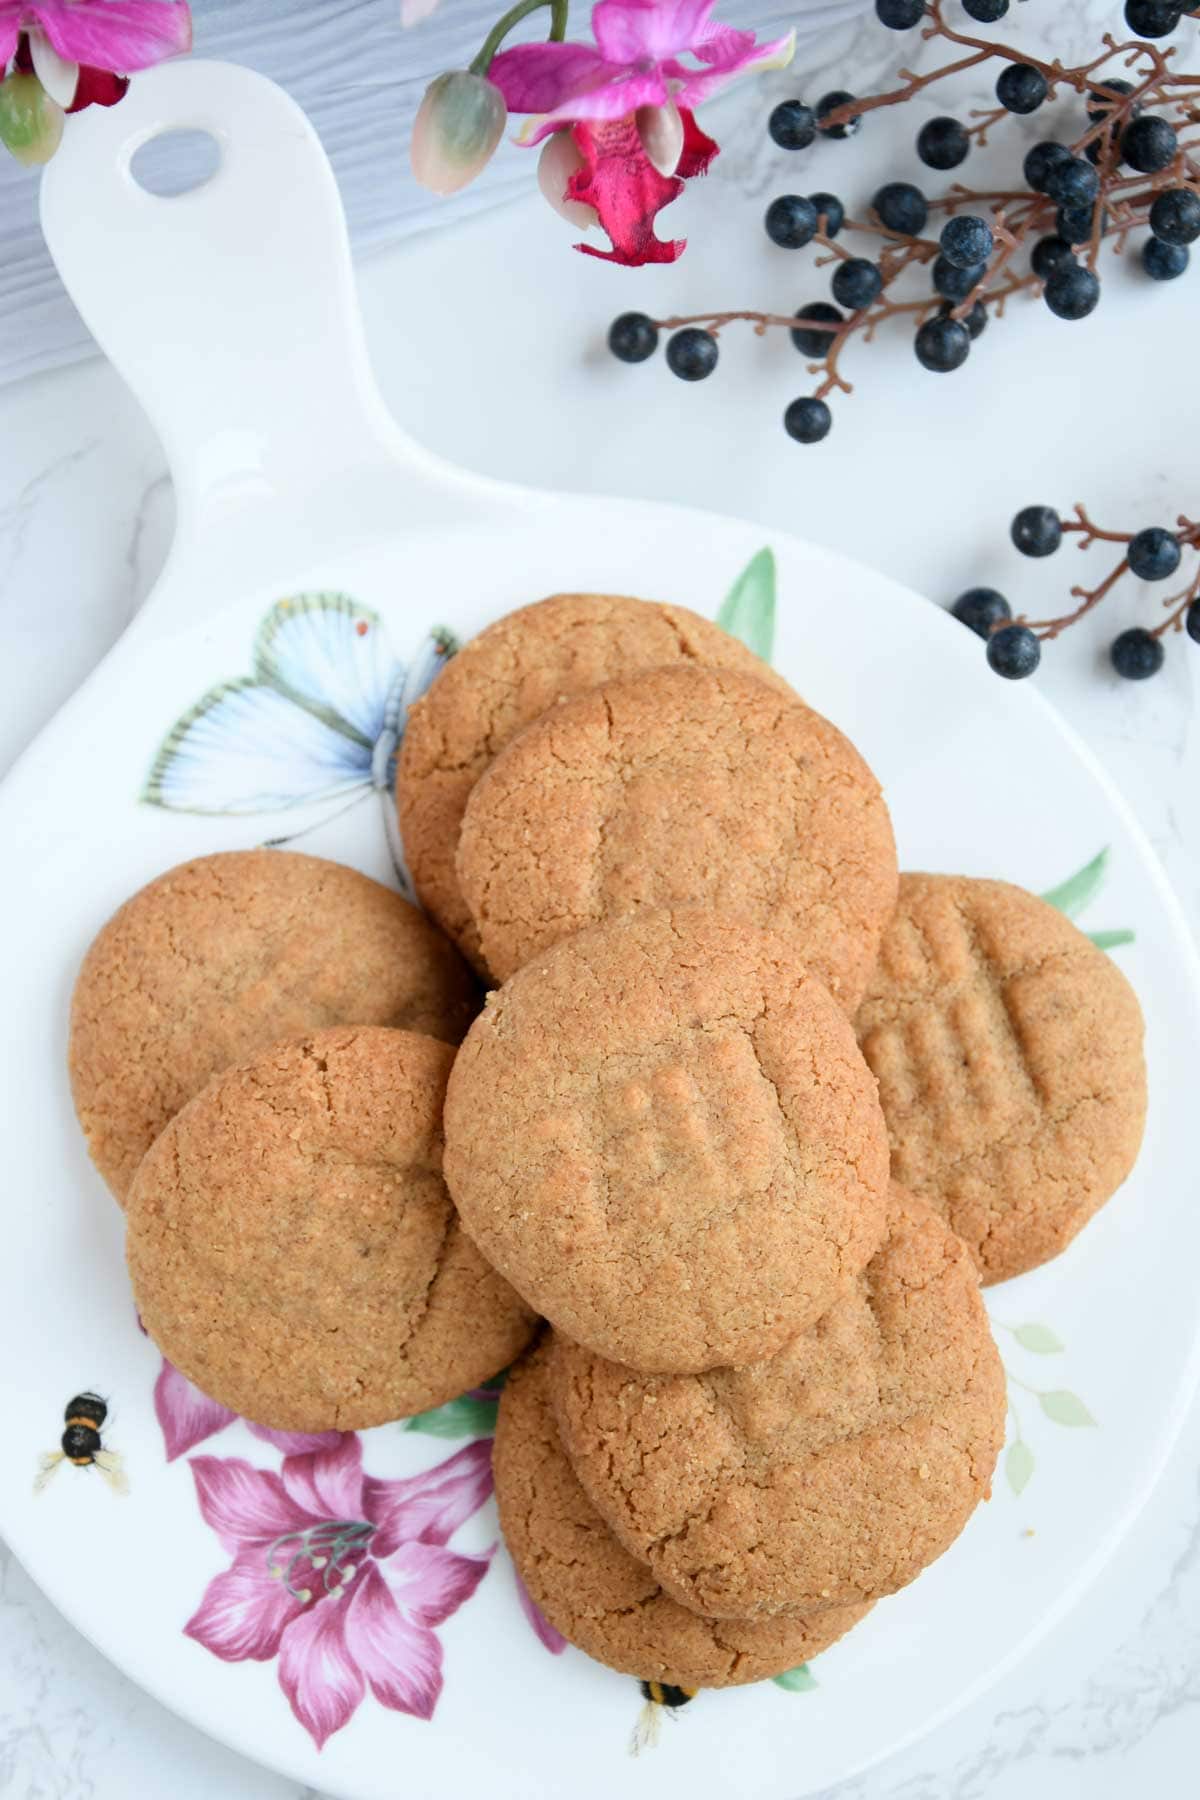 Peanut butter cookies served on a cheese board.